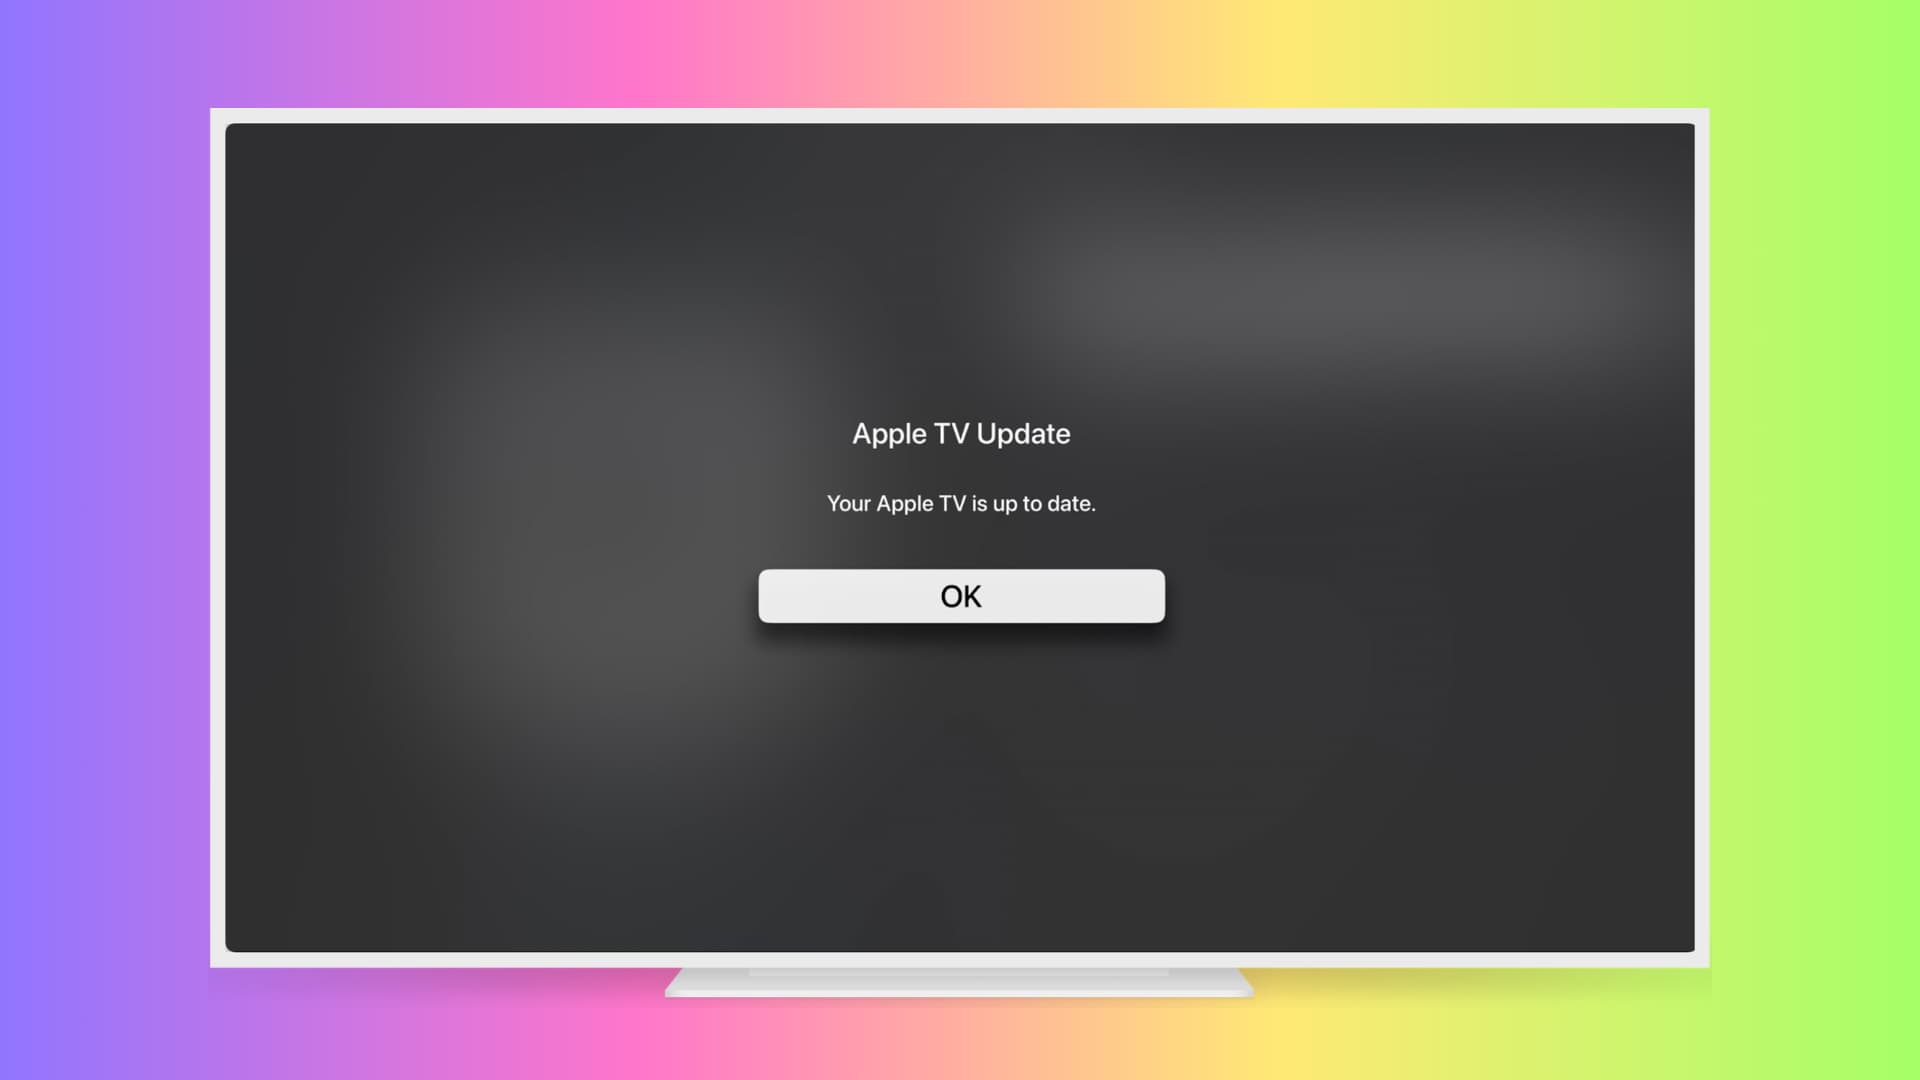 Apple TV Update screen saying Your Apple TV is up to date